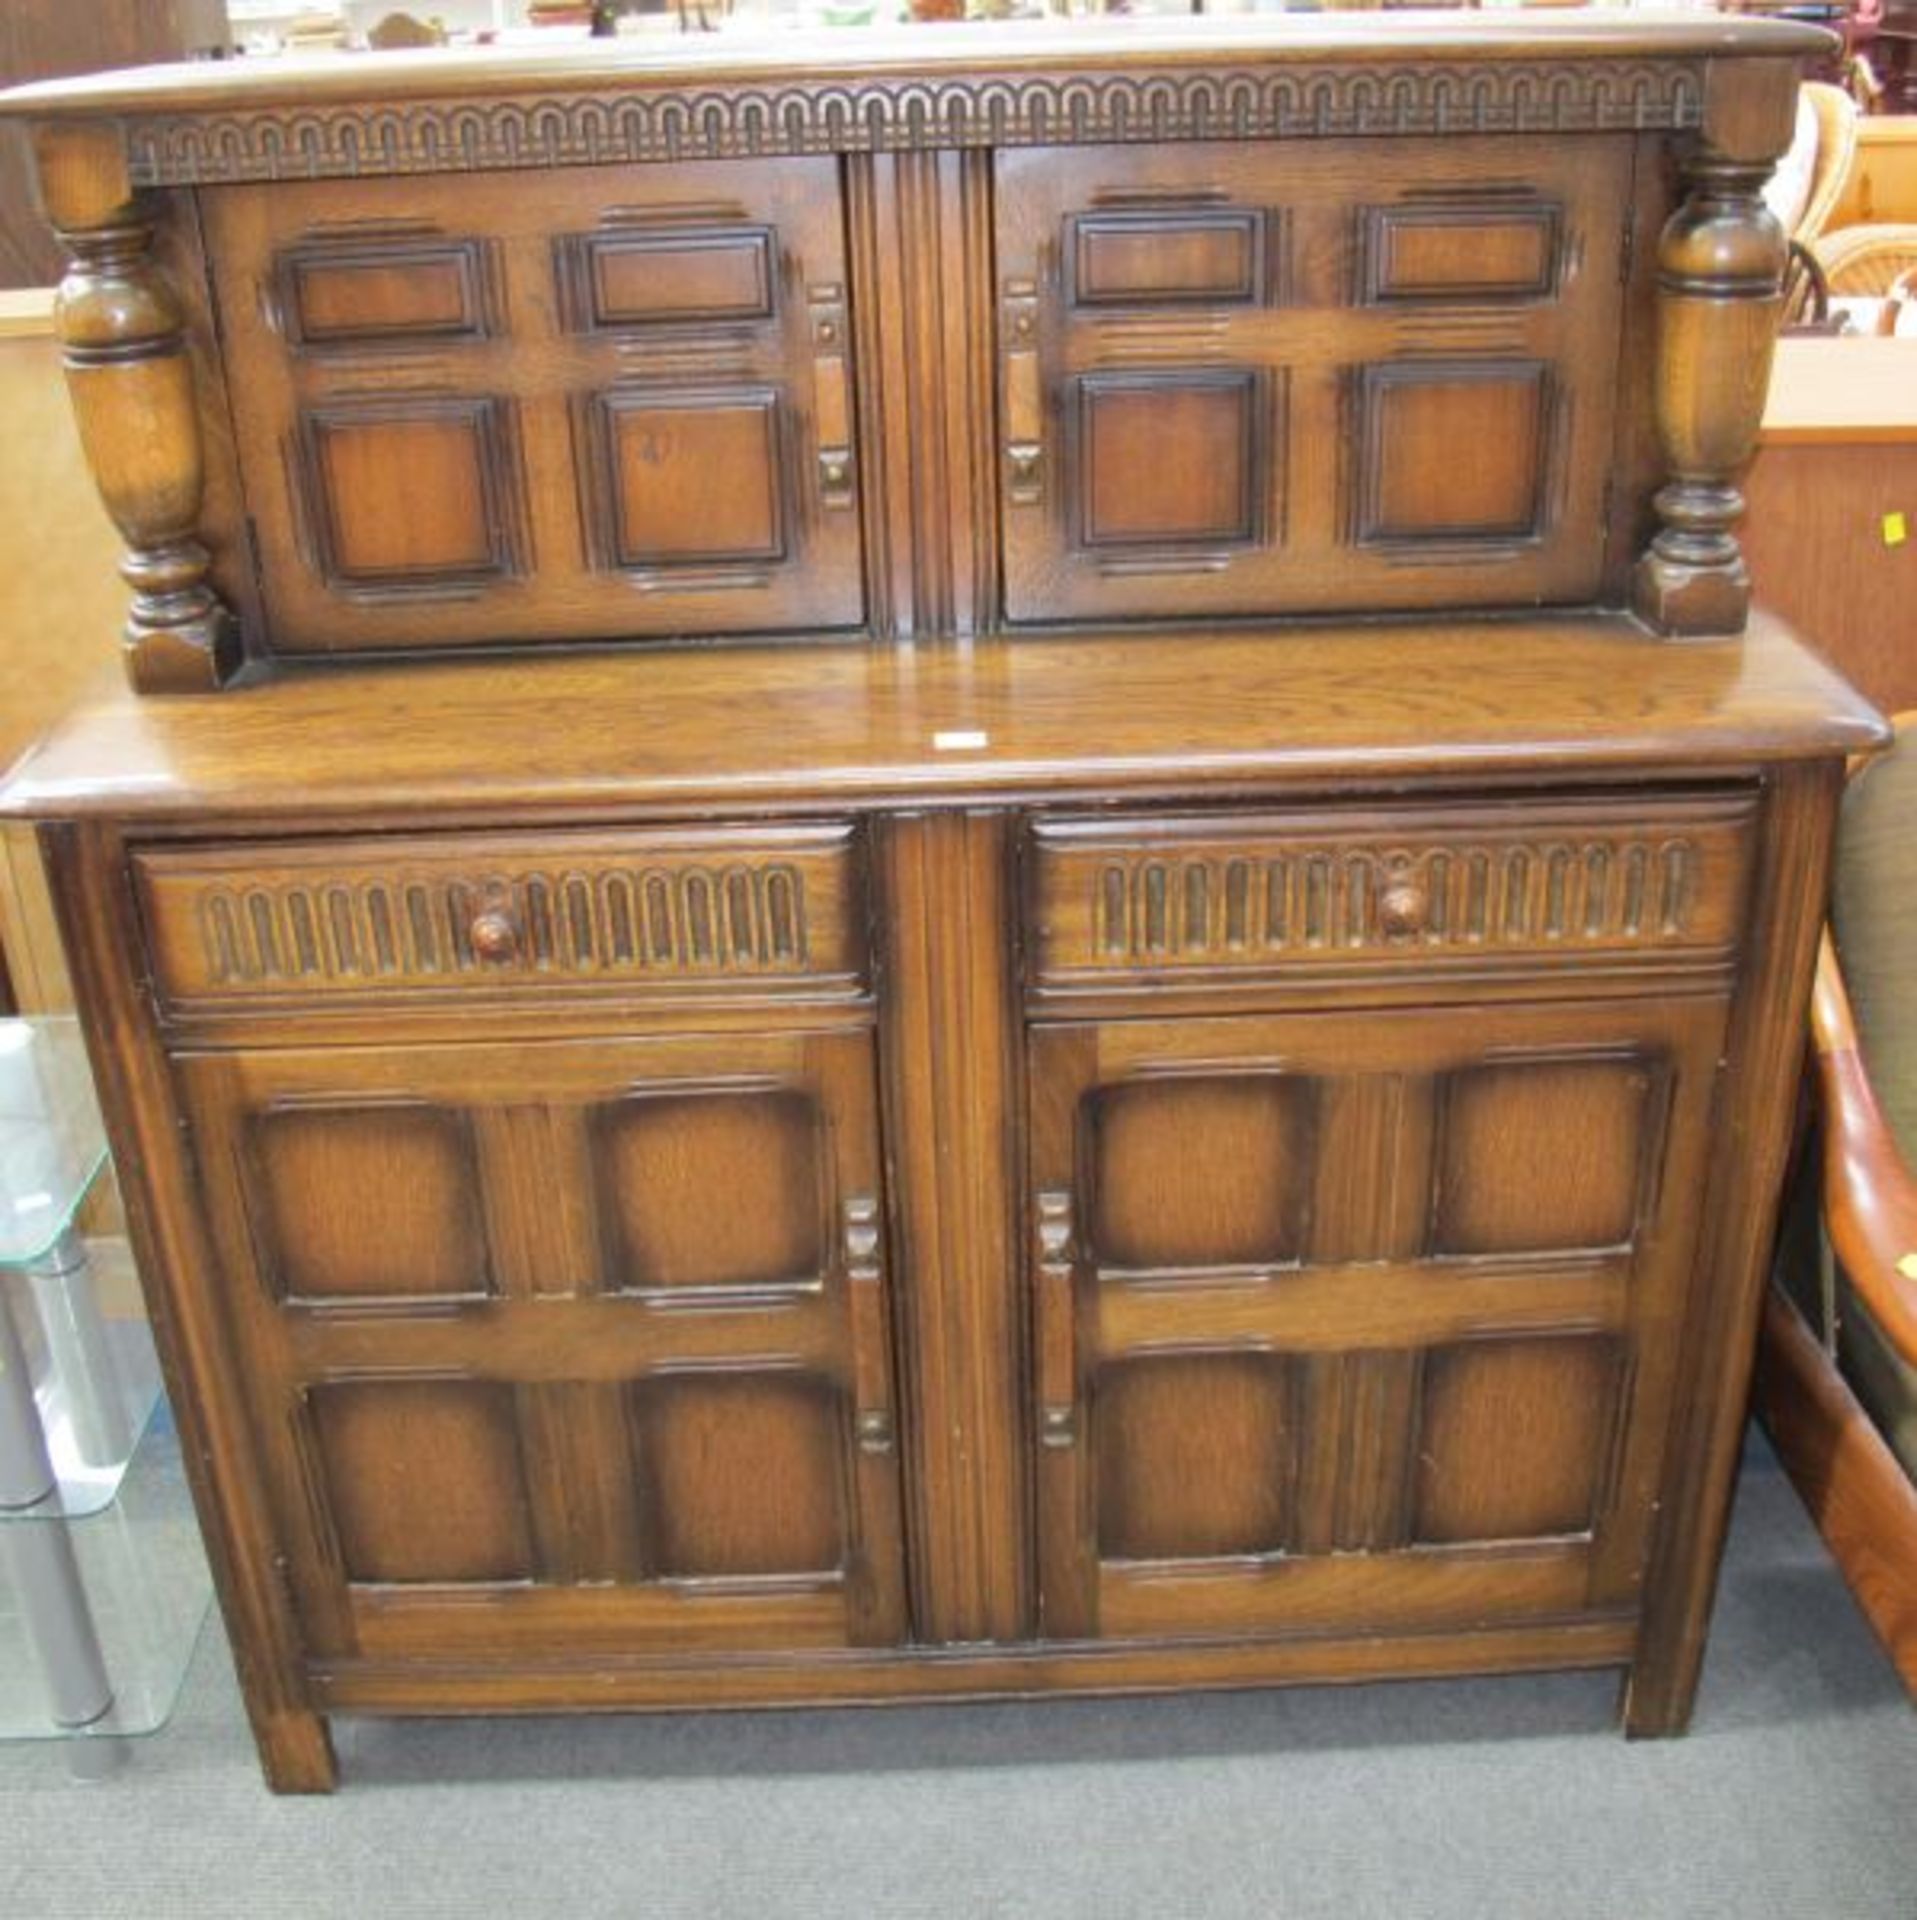 A Reproduction Oak ''Court'' Cupboard/Sideboard with Carved Panel Cupboard Doors and Drawers.